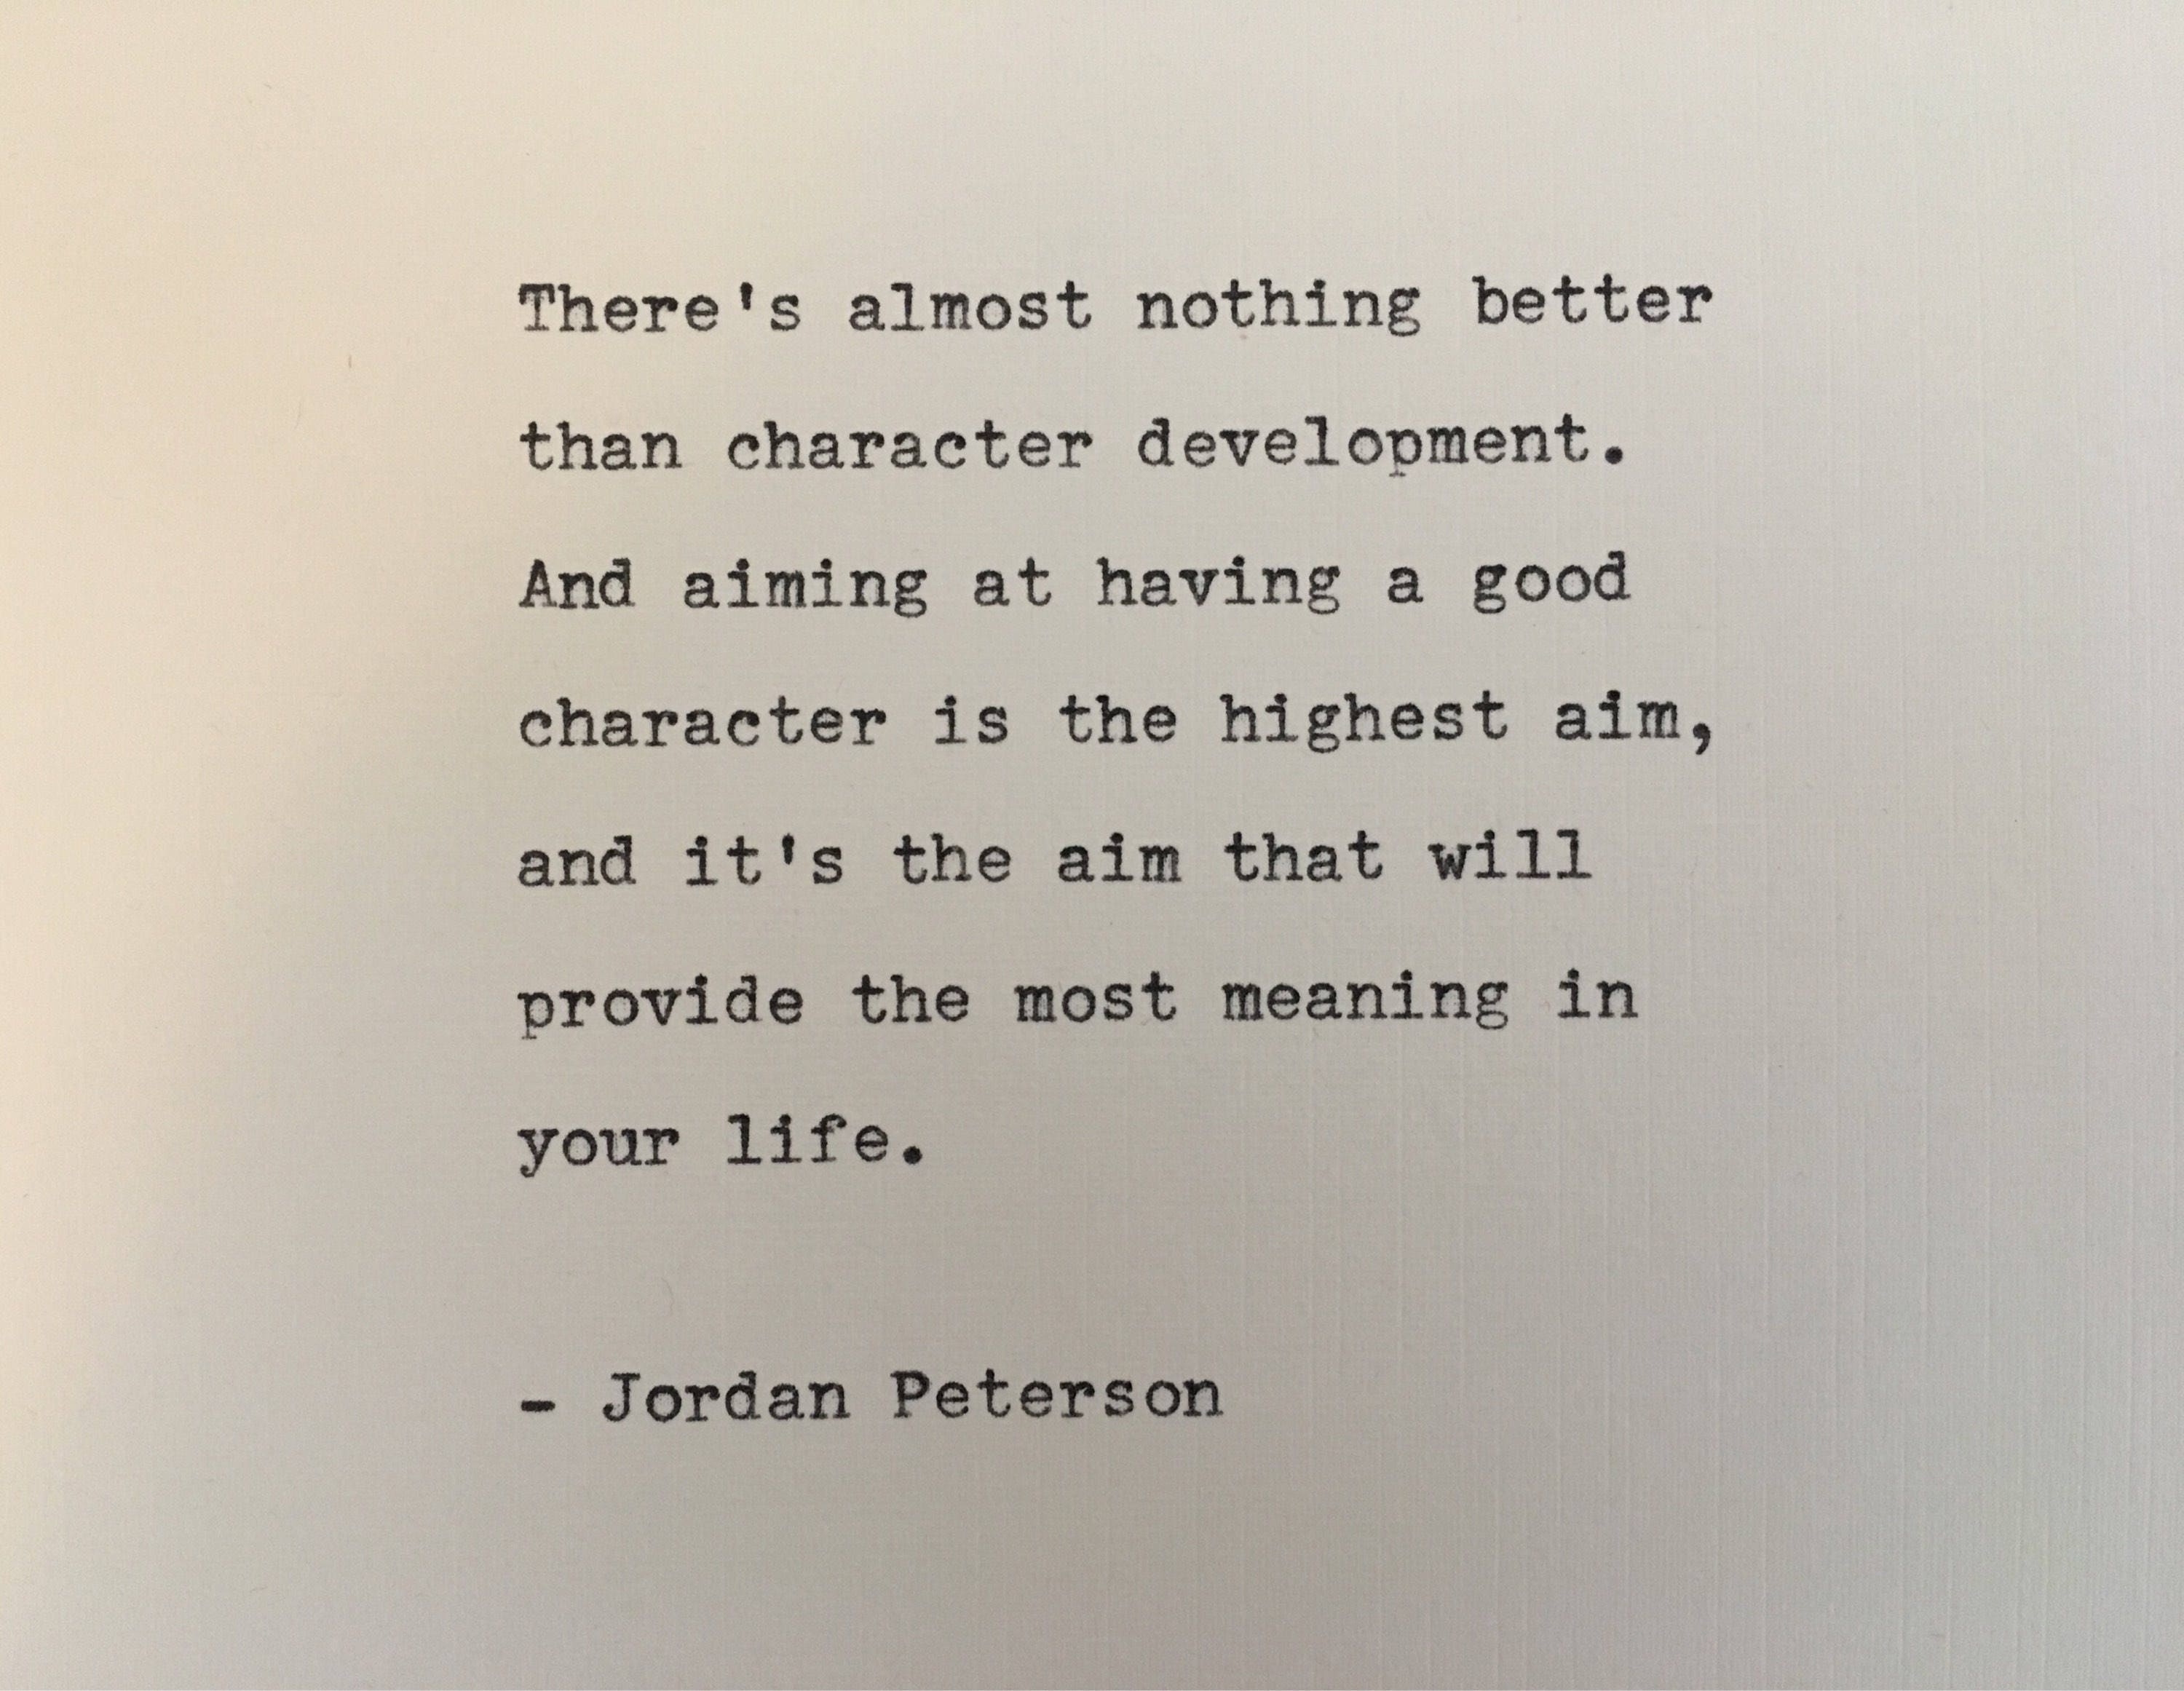 Jordan Peterson Quote Hand Typed on an Antique Typewriter - Etsy